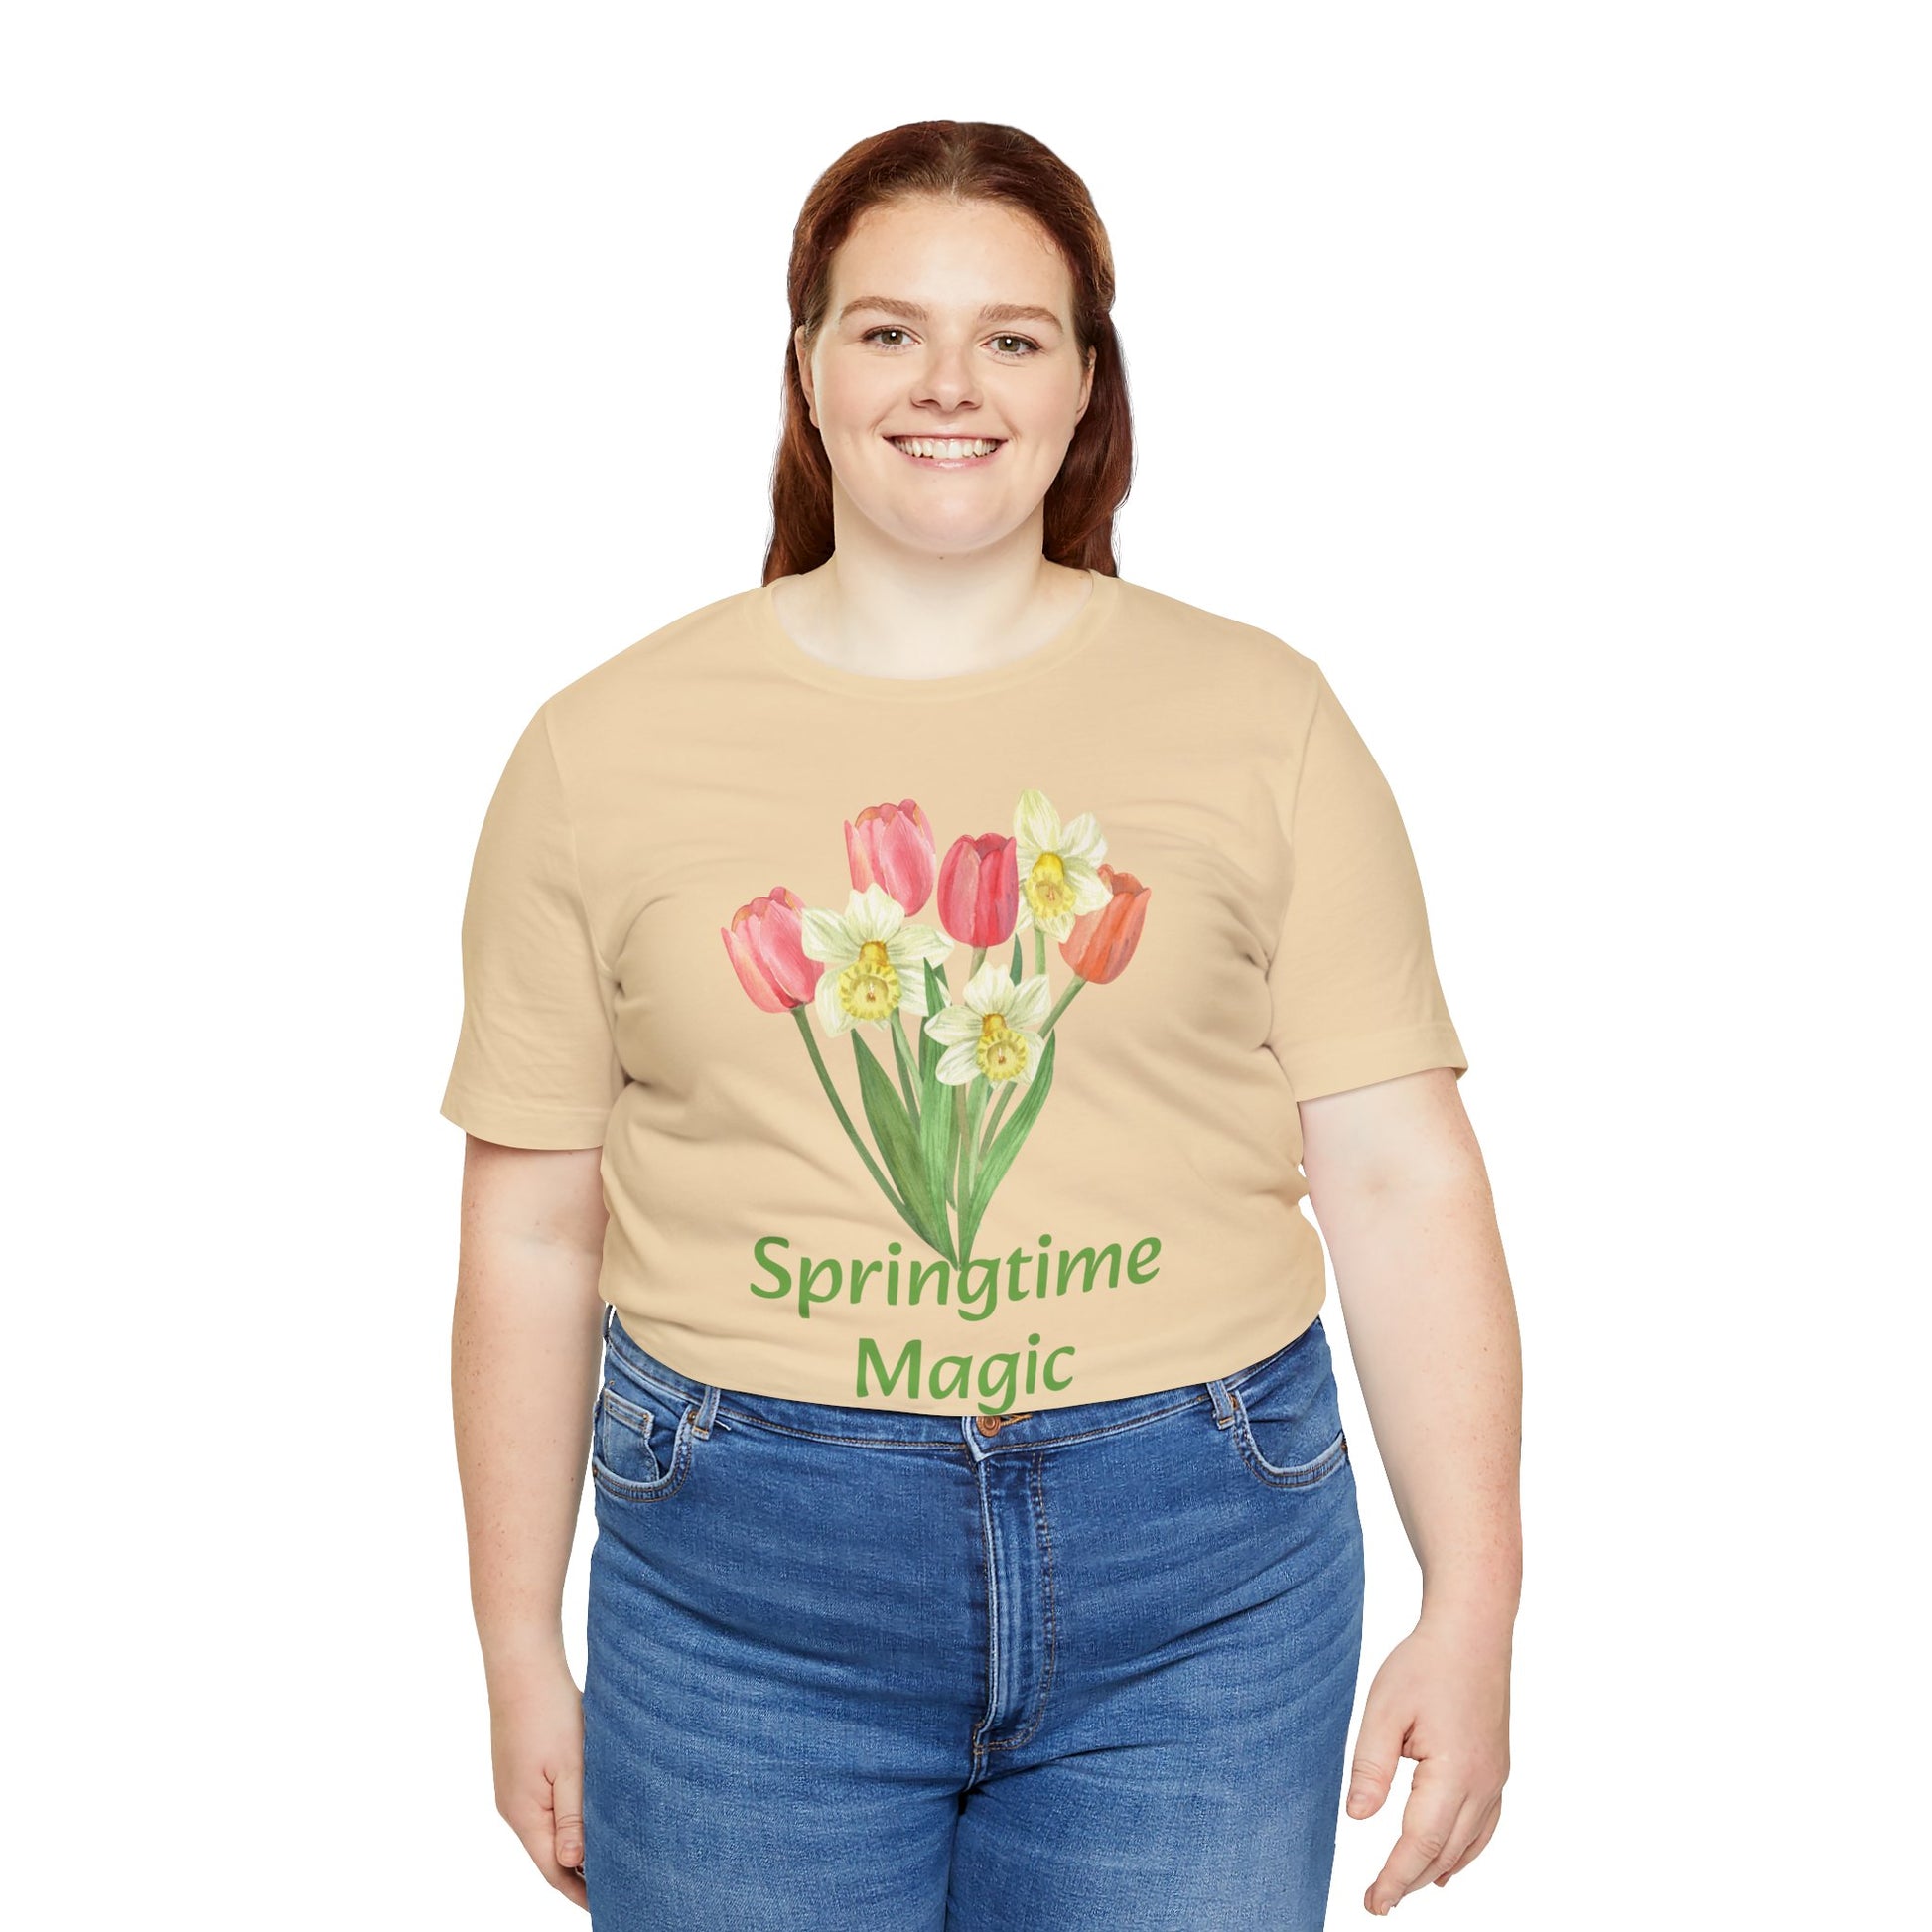 Woman in a beige Unisex Springtime-Magic T-shirt by Bella + Canvas, paired with blue jeans, smiling at the camera.